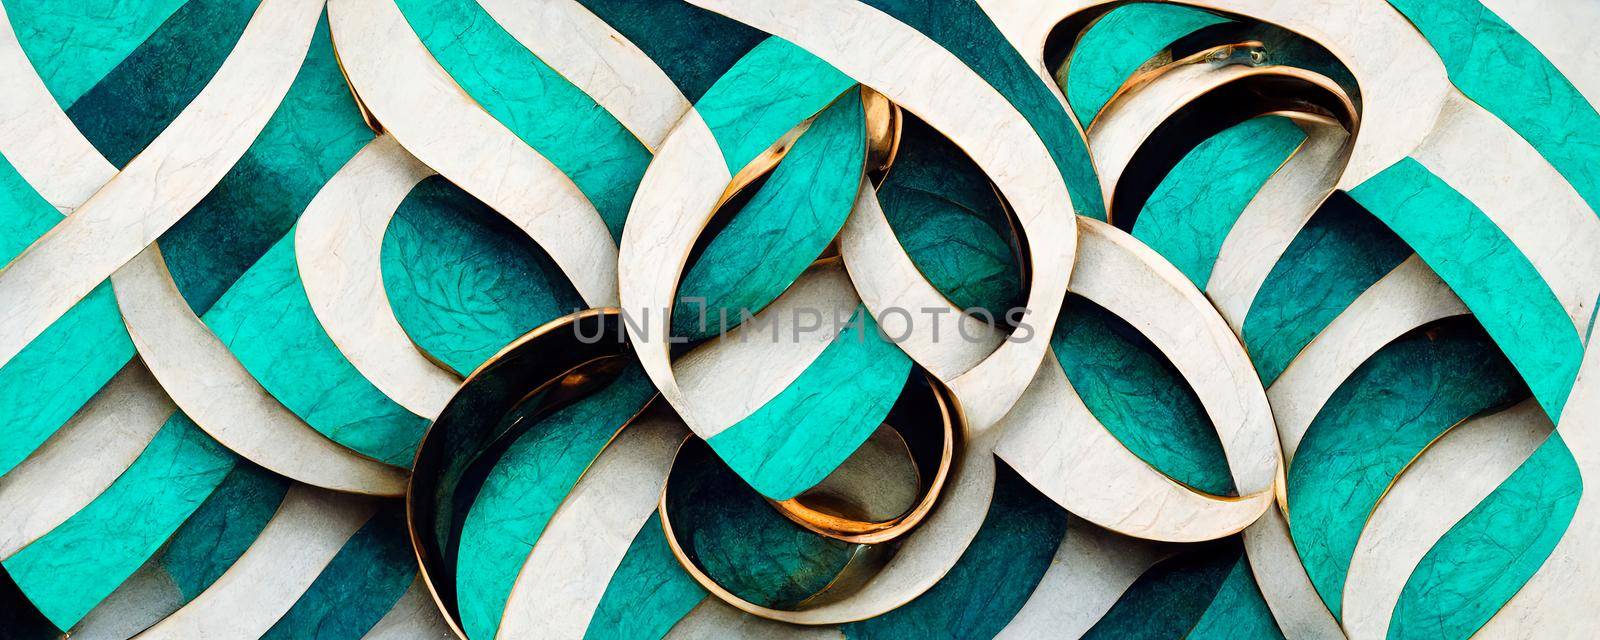 Turquoise gold rings, Colorful abstract wallpaper texture background illustration by TRMK